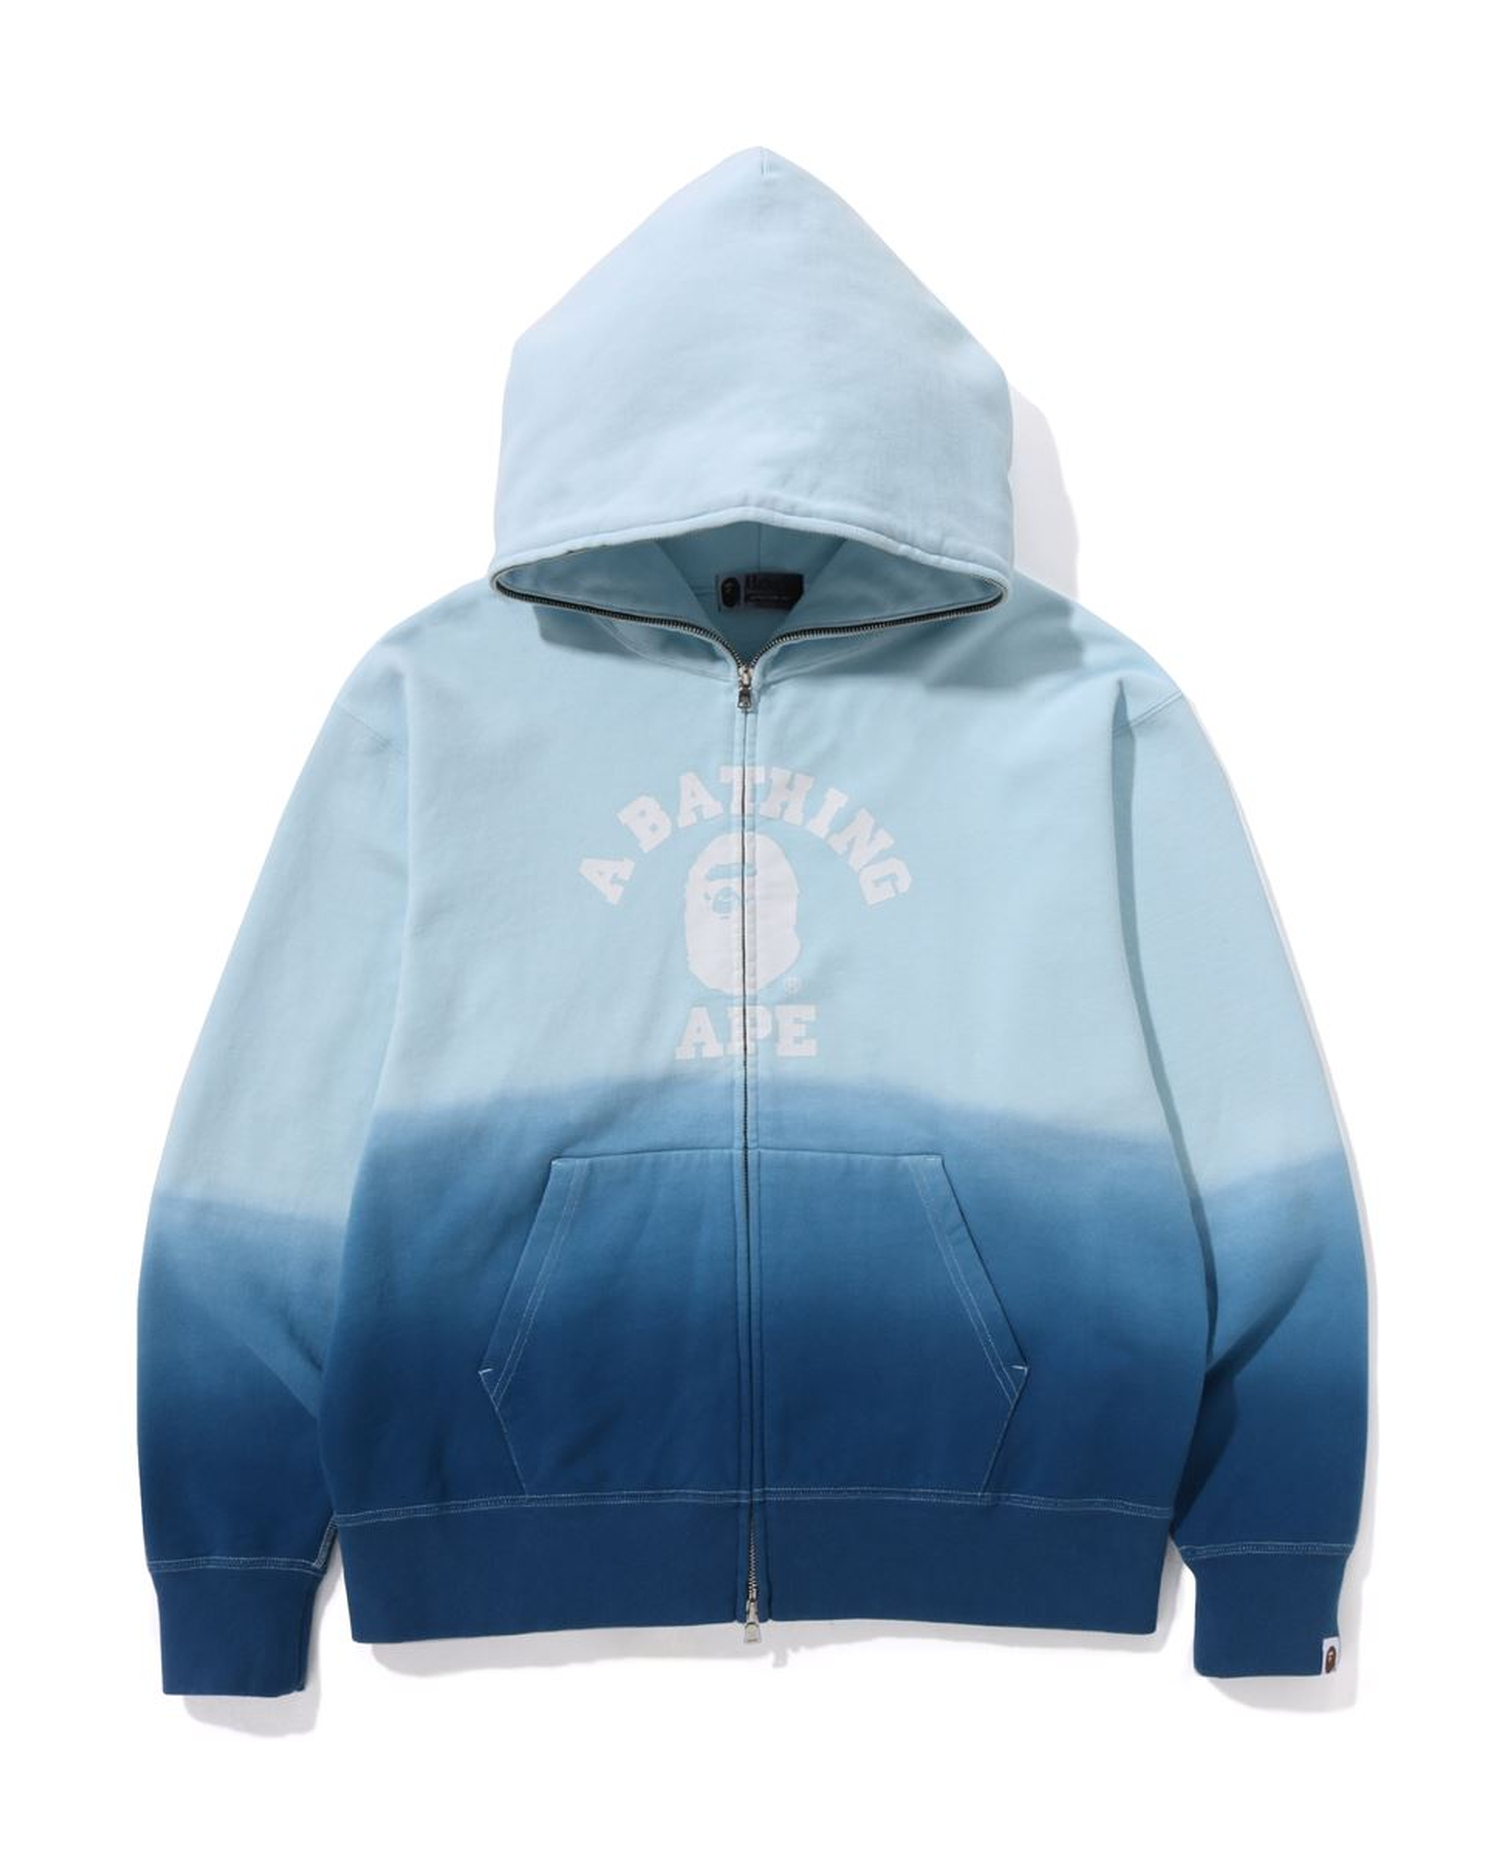 Shop College Gradation Relaxed Fit Full Zip Hoodie Online | BAPE